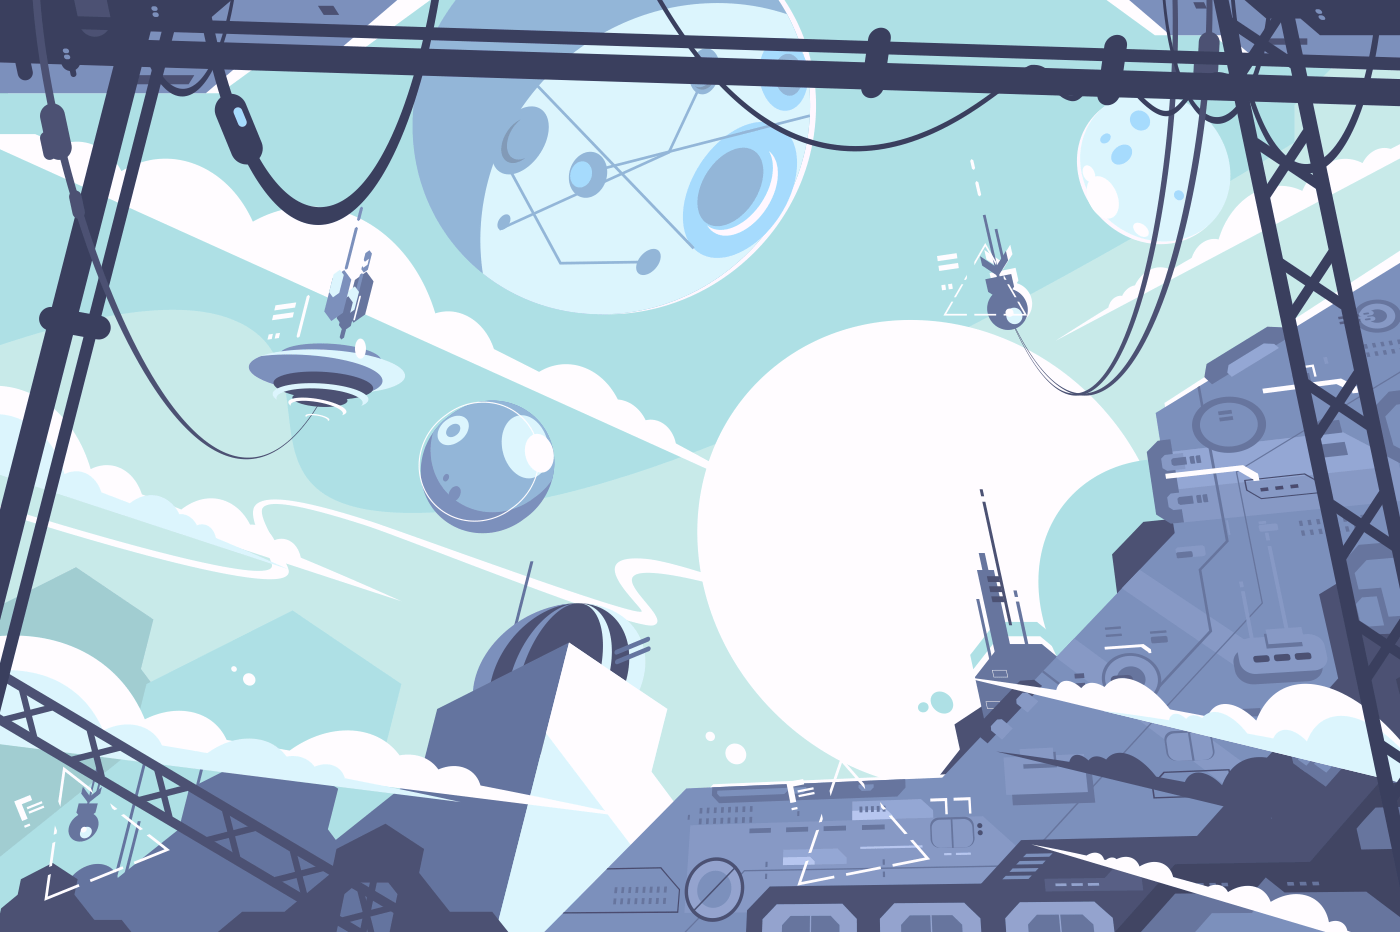 Space colony with rockets and stations in zero gravity. Vector illustration